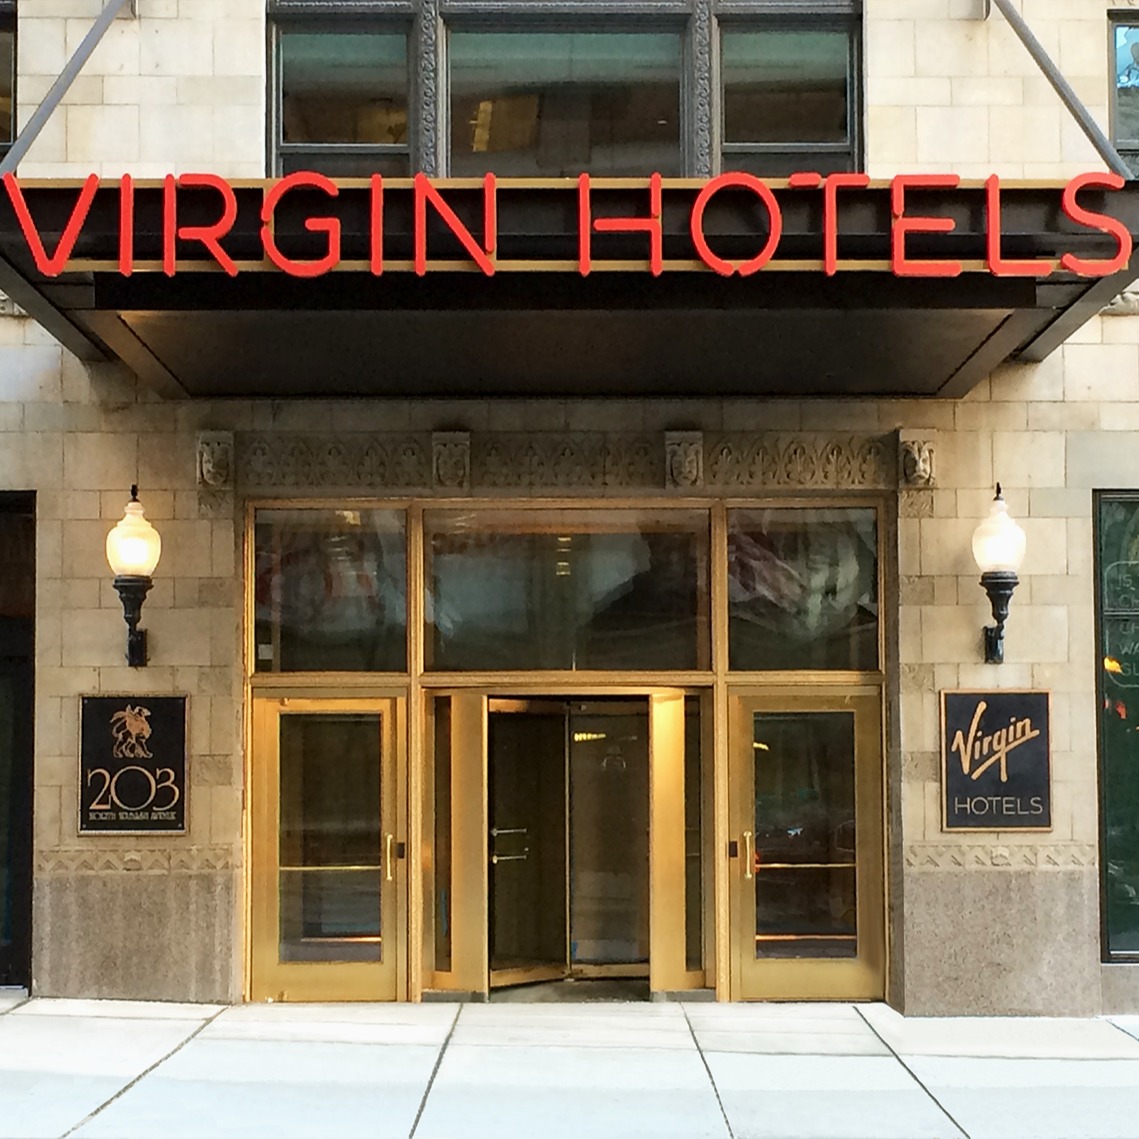 The entrance to Virgin Hotels Chicago 